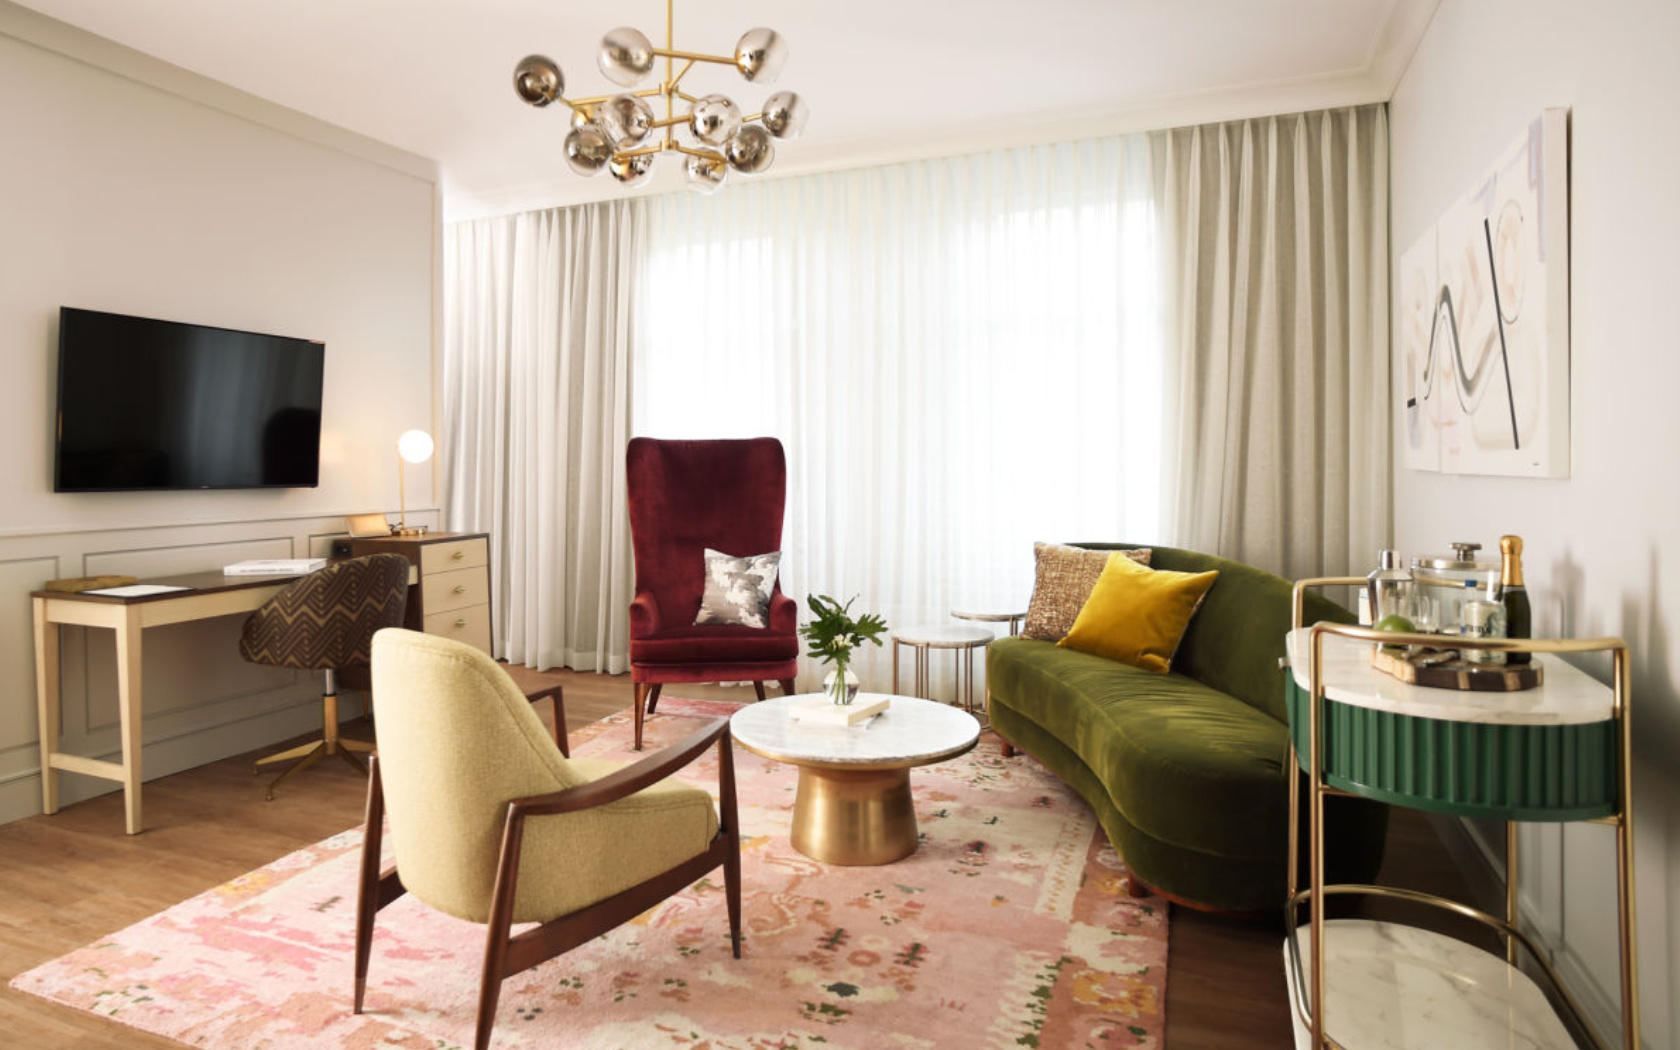 Plush velvet upholstered pieces create a warm and relaxing environment for a West Elm hotel room.